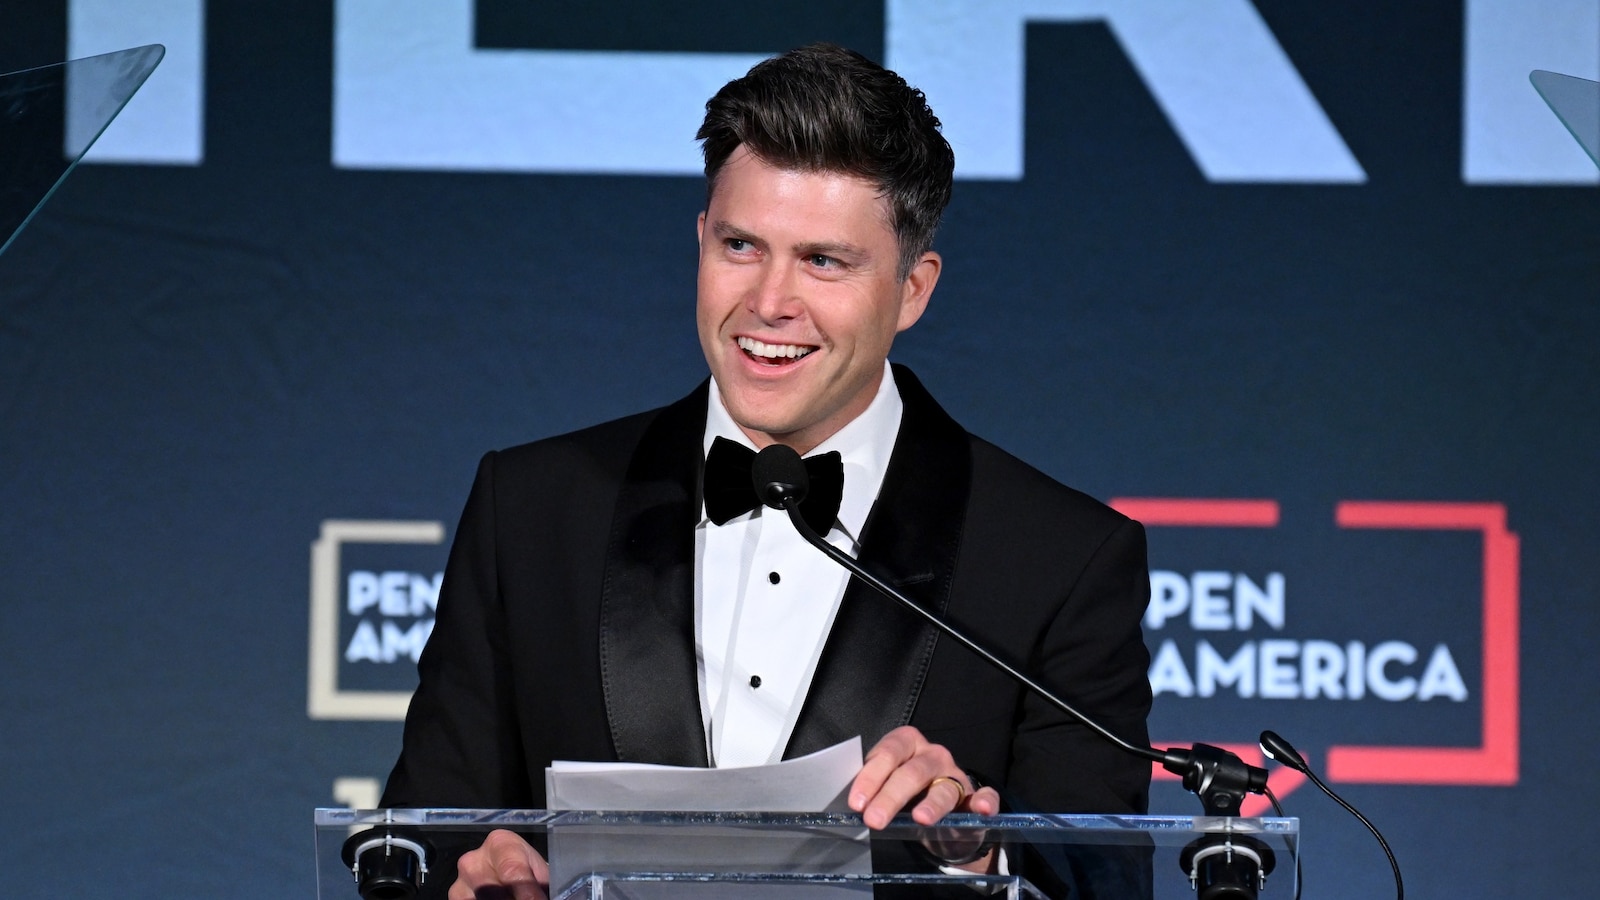 Colin Jost from SNL announced as featured entertainer for White House correspondents' dinner